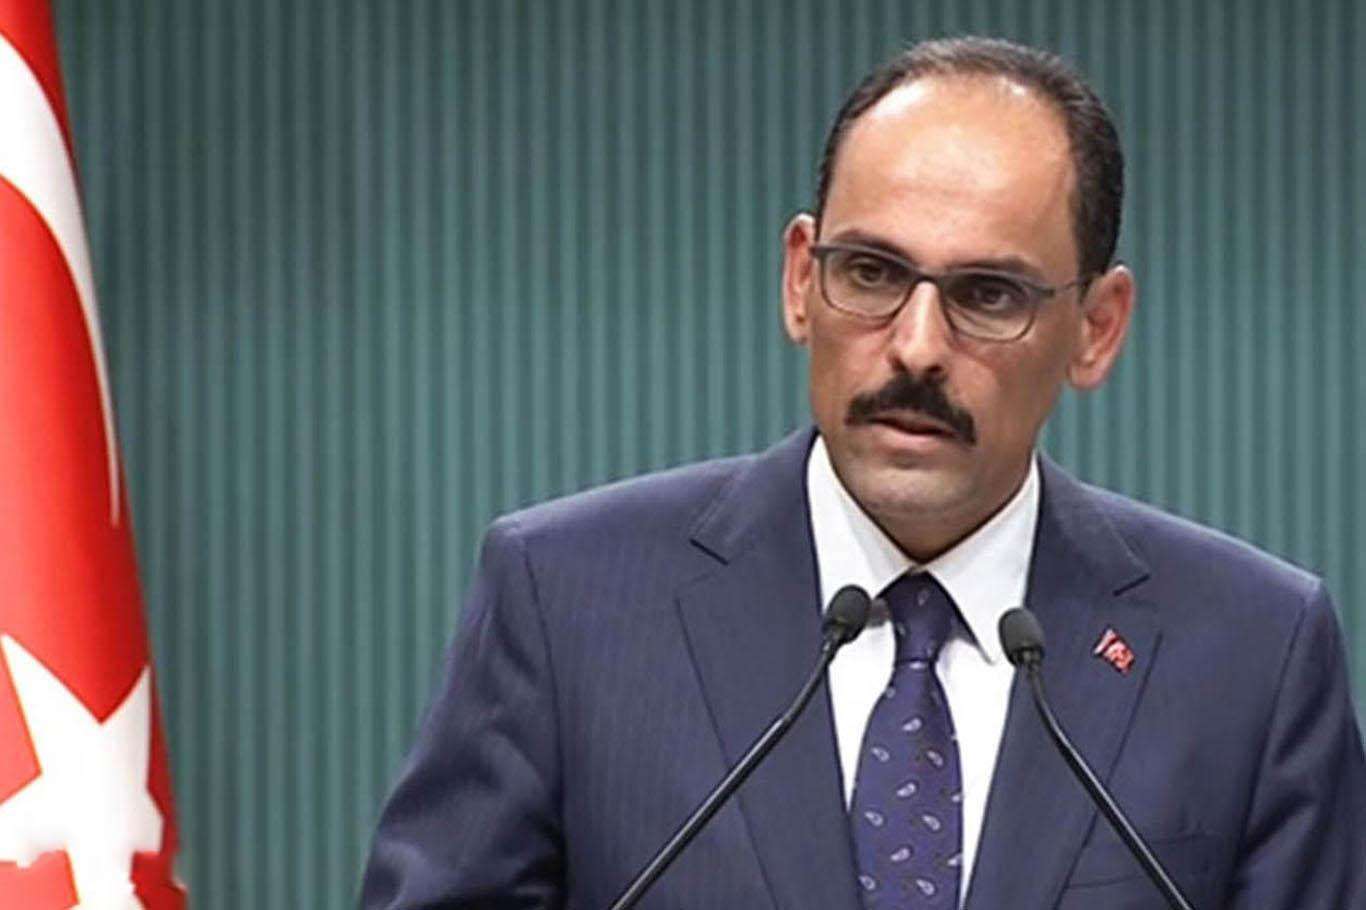 Turkey condemns Tunisian president's decision to dismiss government